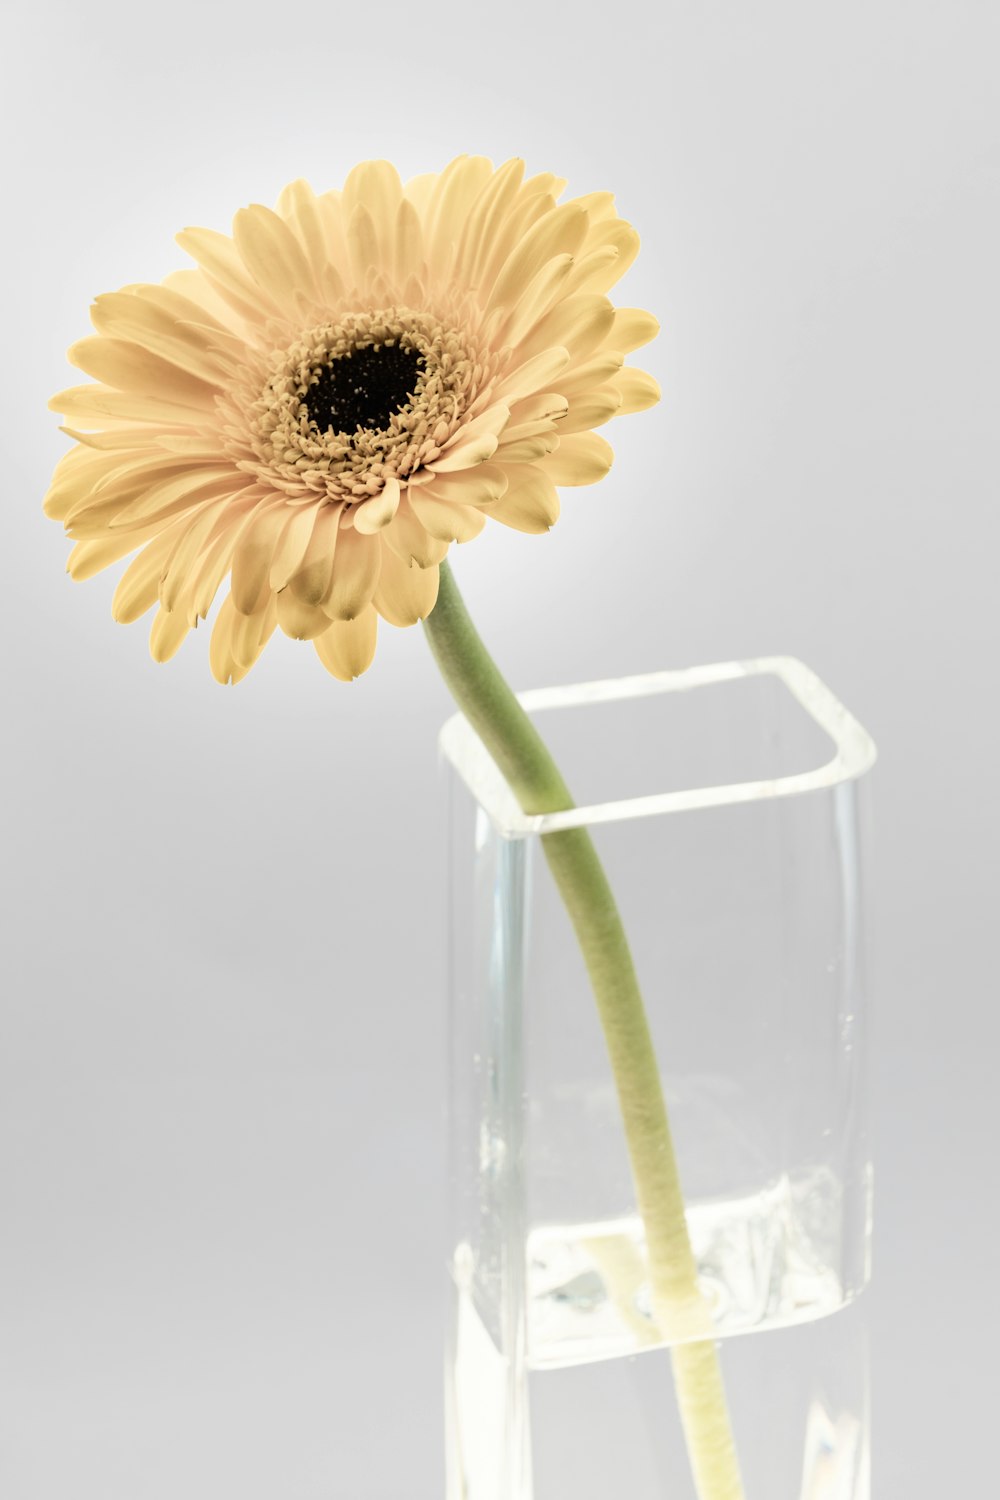 yellow sunflower in clear glass vase